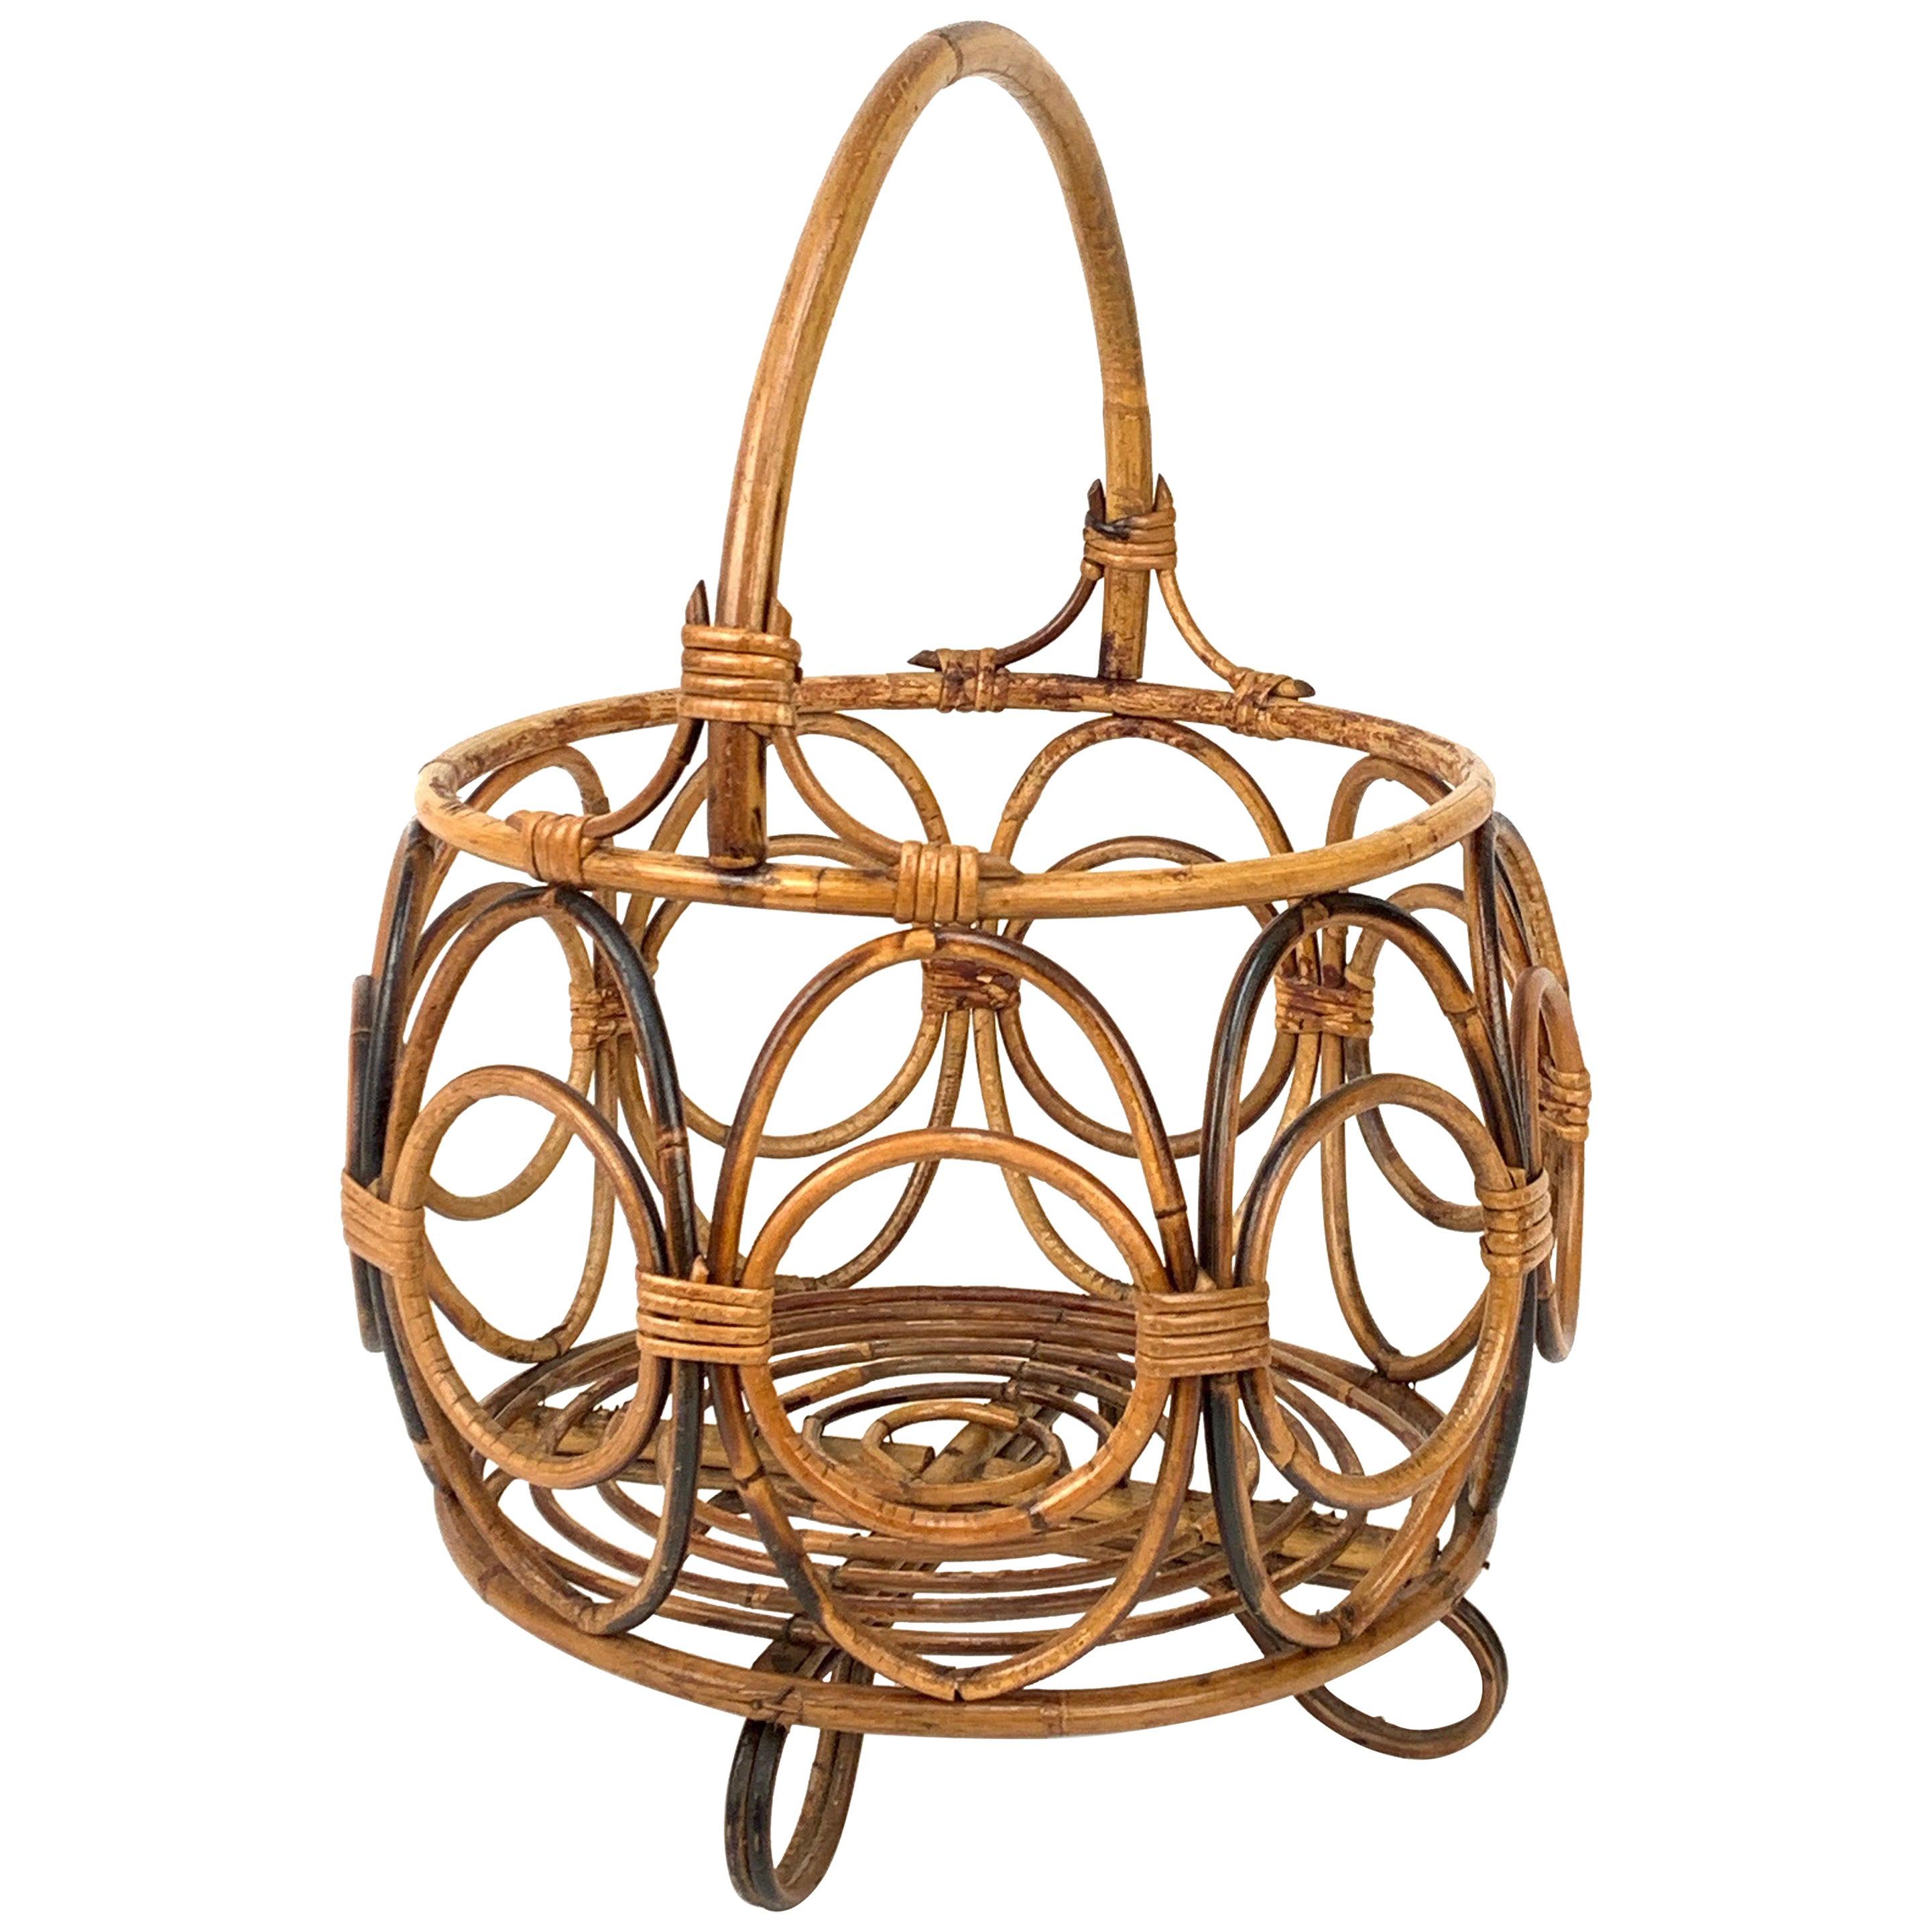 Midcentury French Riviera Bamboo and Rattan Italian Round Magazine Rack, 1960s For Sale